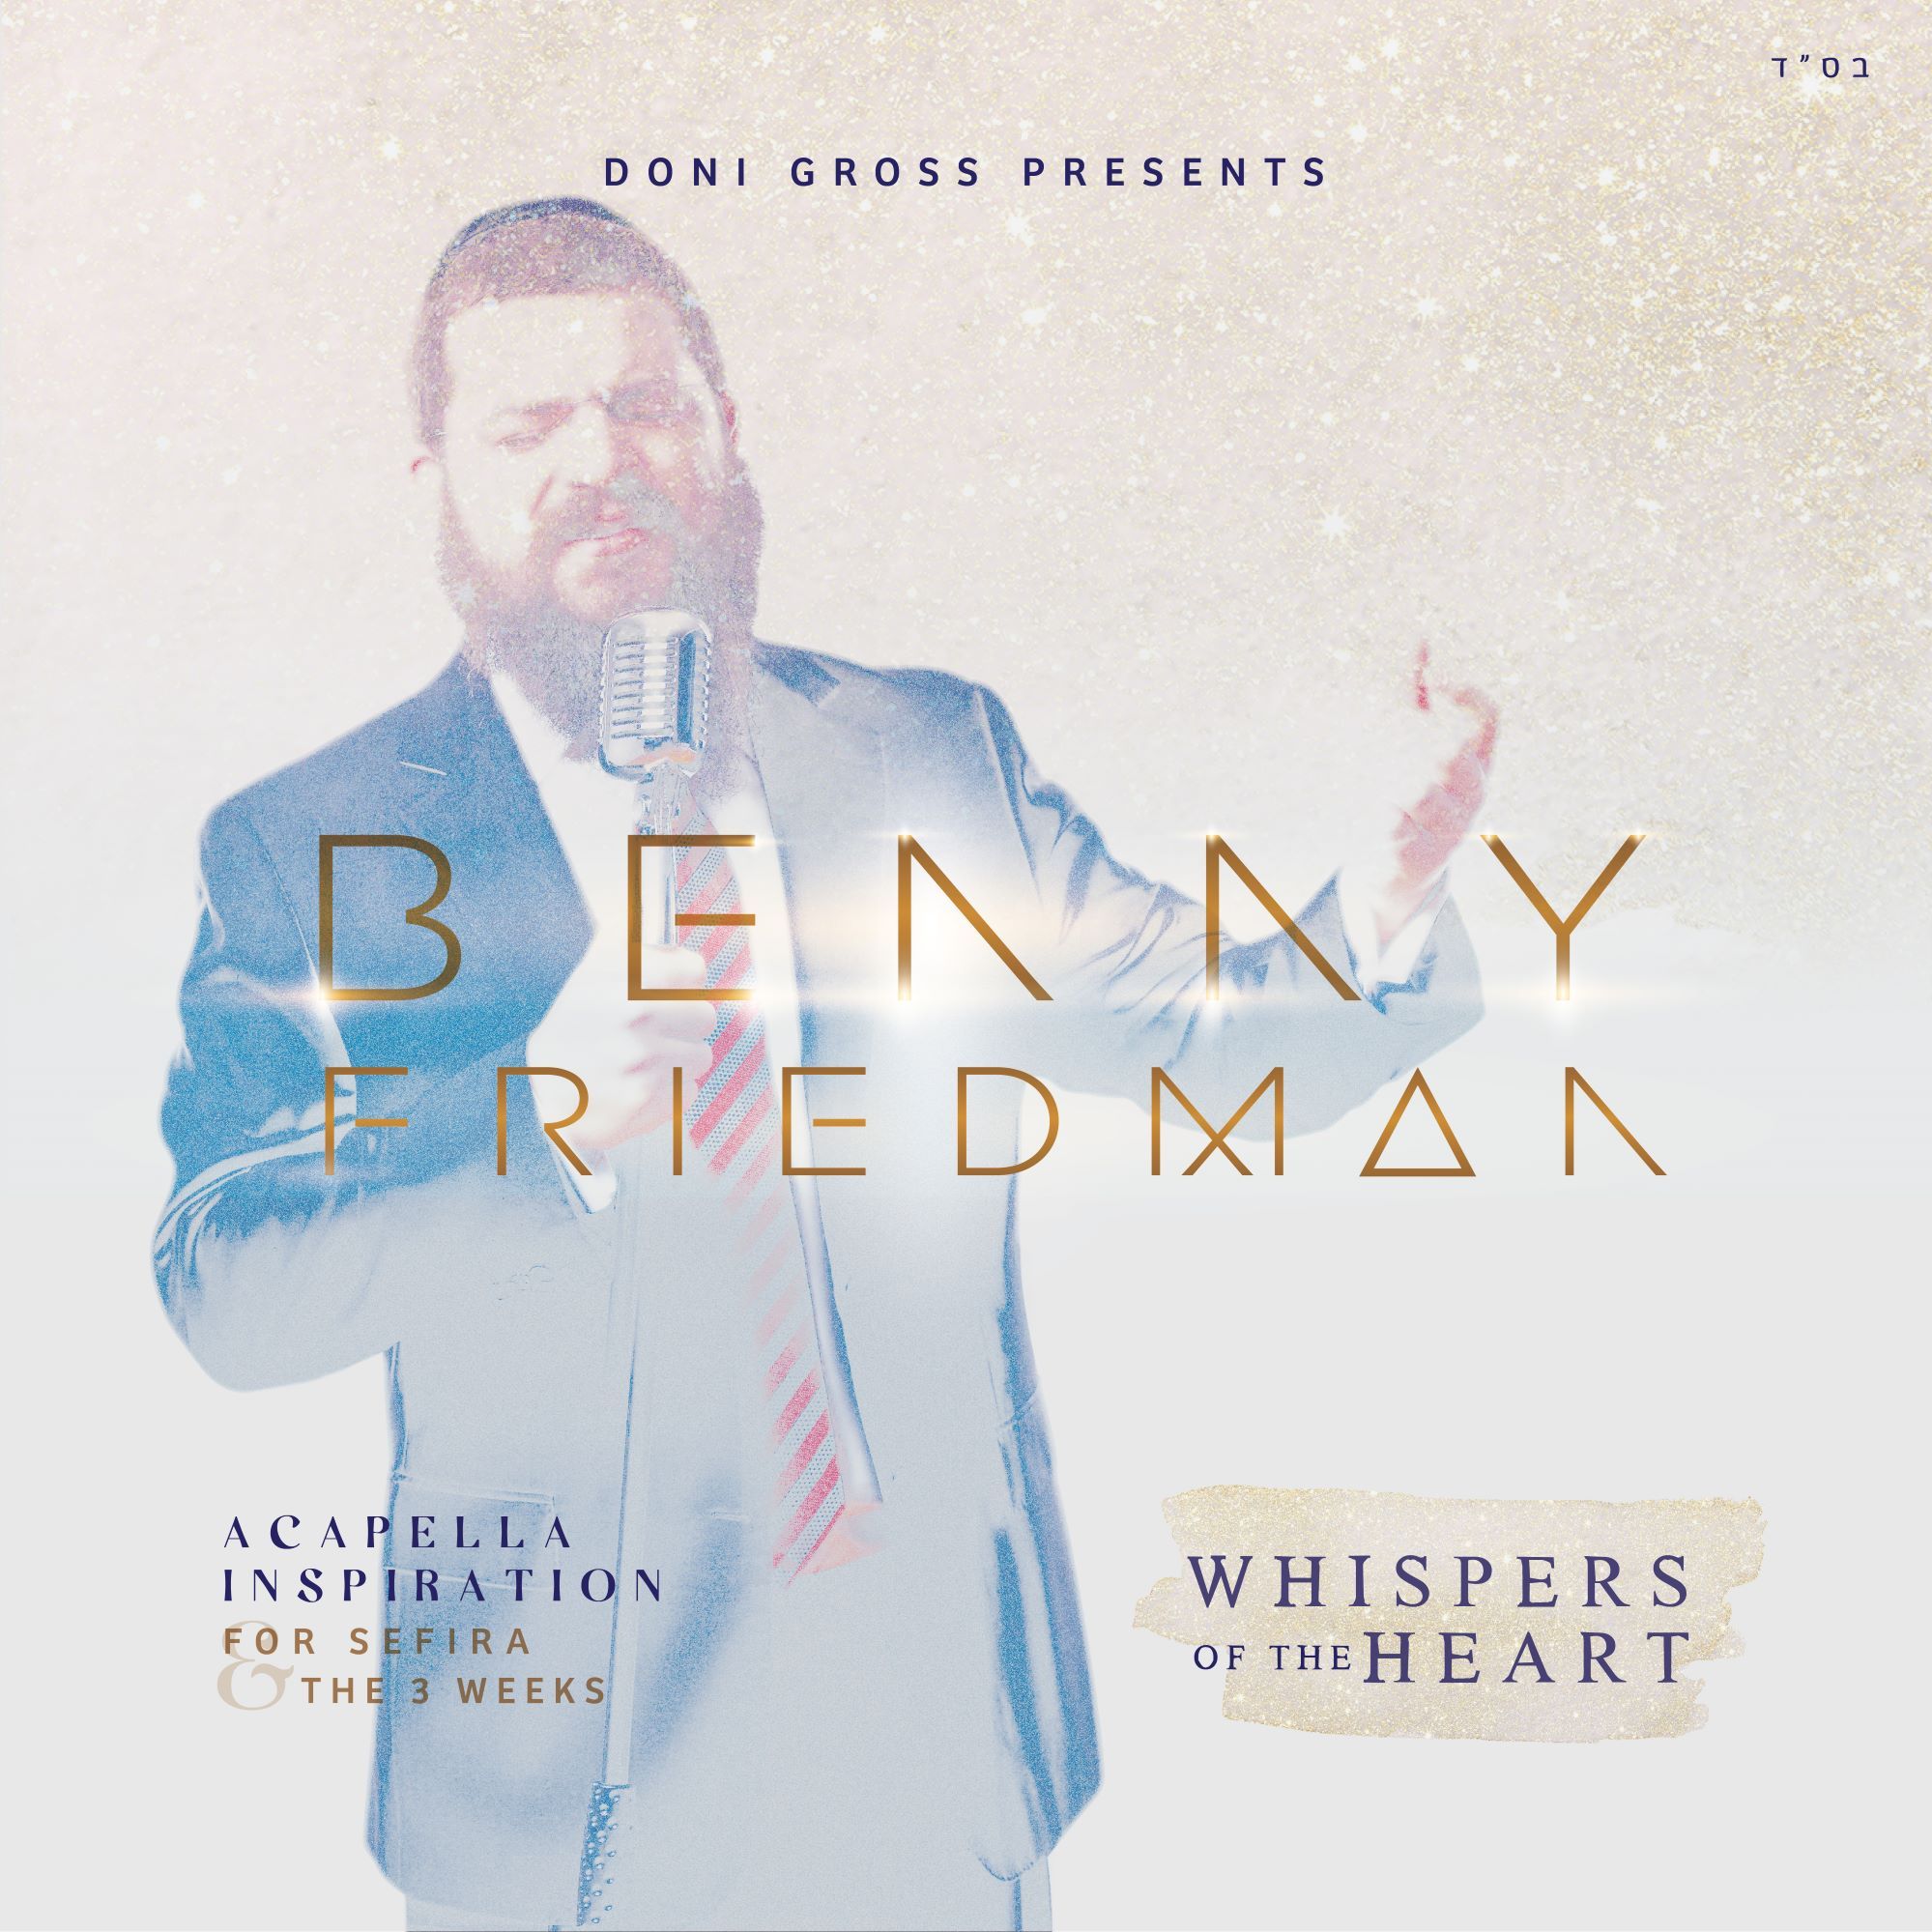 Benny Friedman - Whispers Of The Heart (Acapella Inspiration)